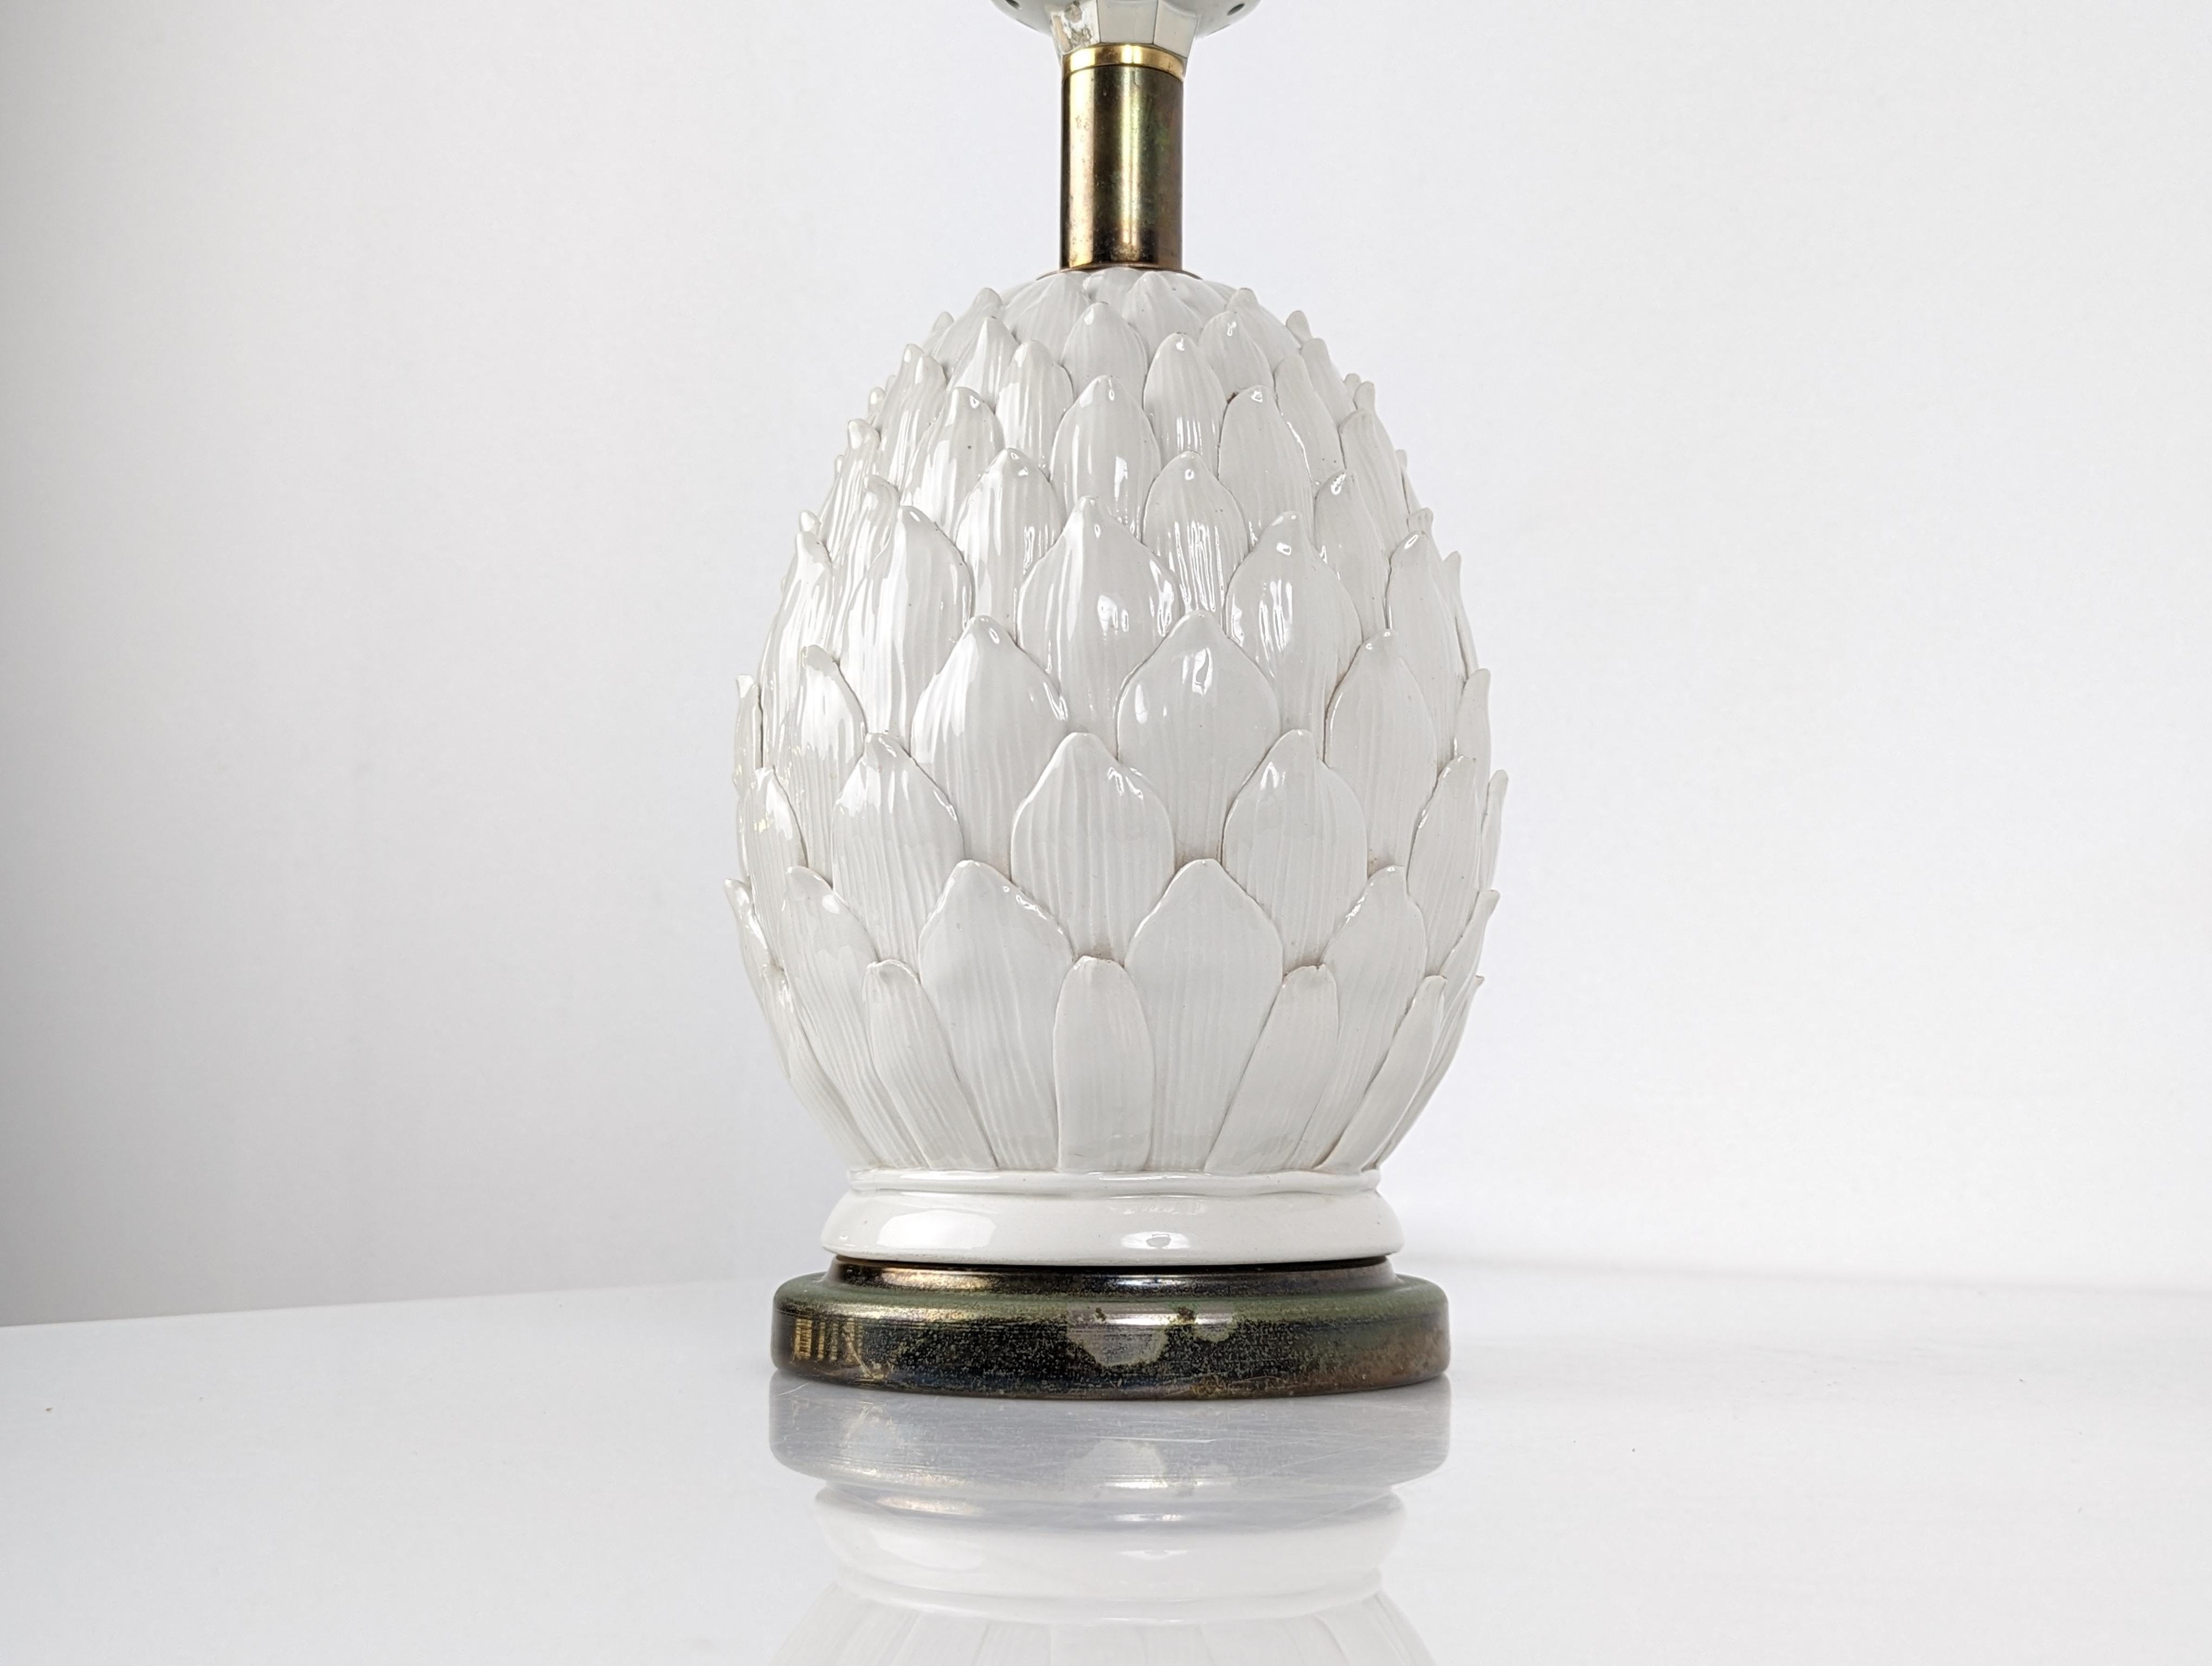 Beautiful porcelain lamp in the shape of an artichoke from the 70s.

Screen not included.